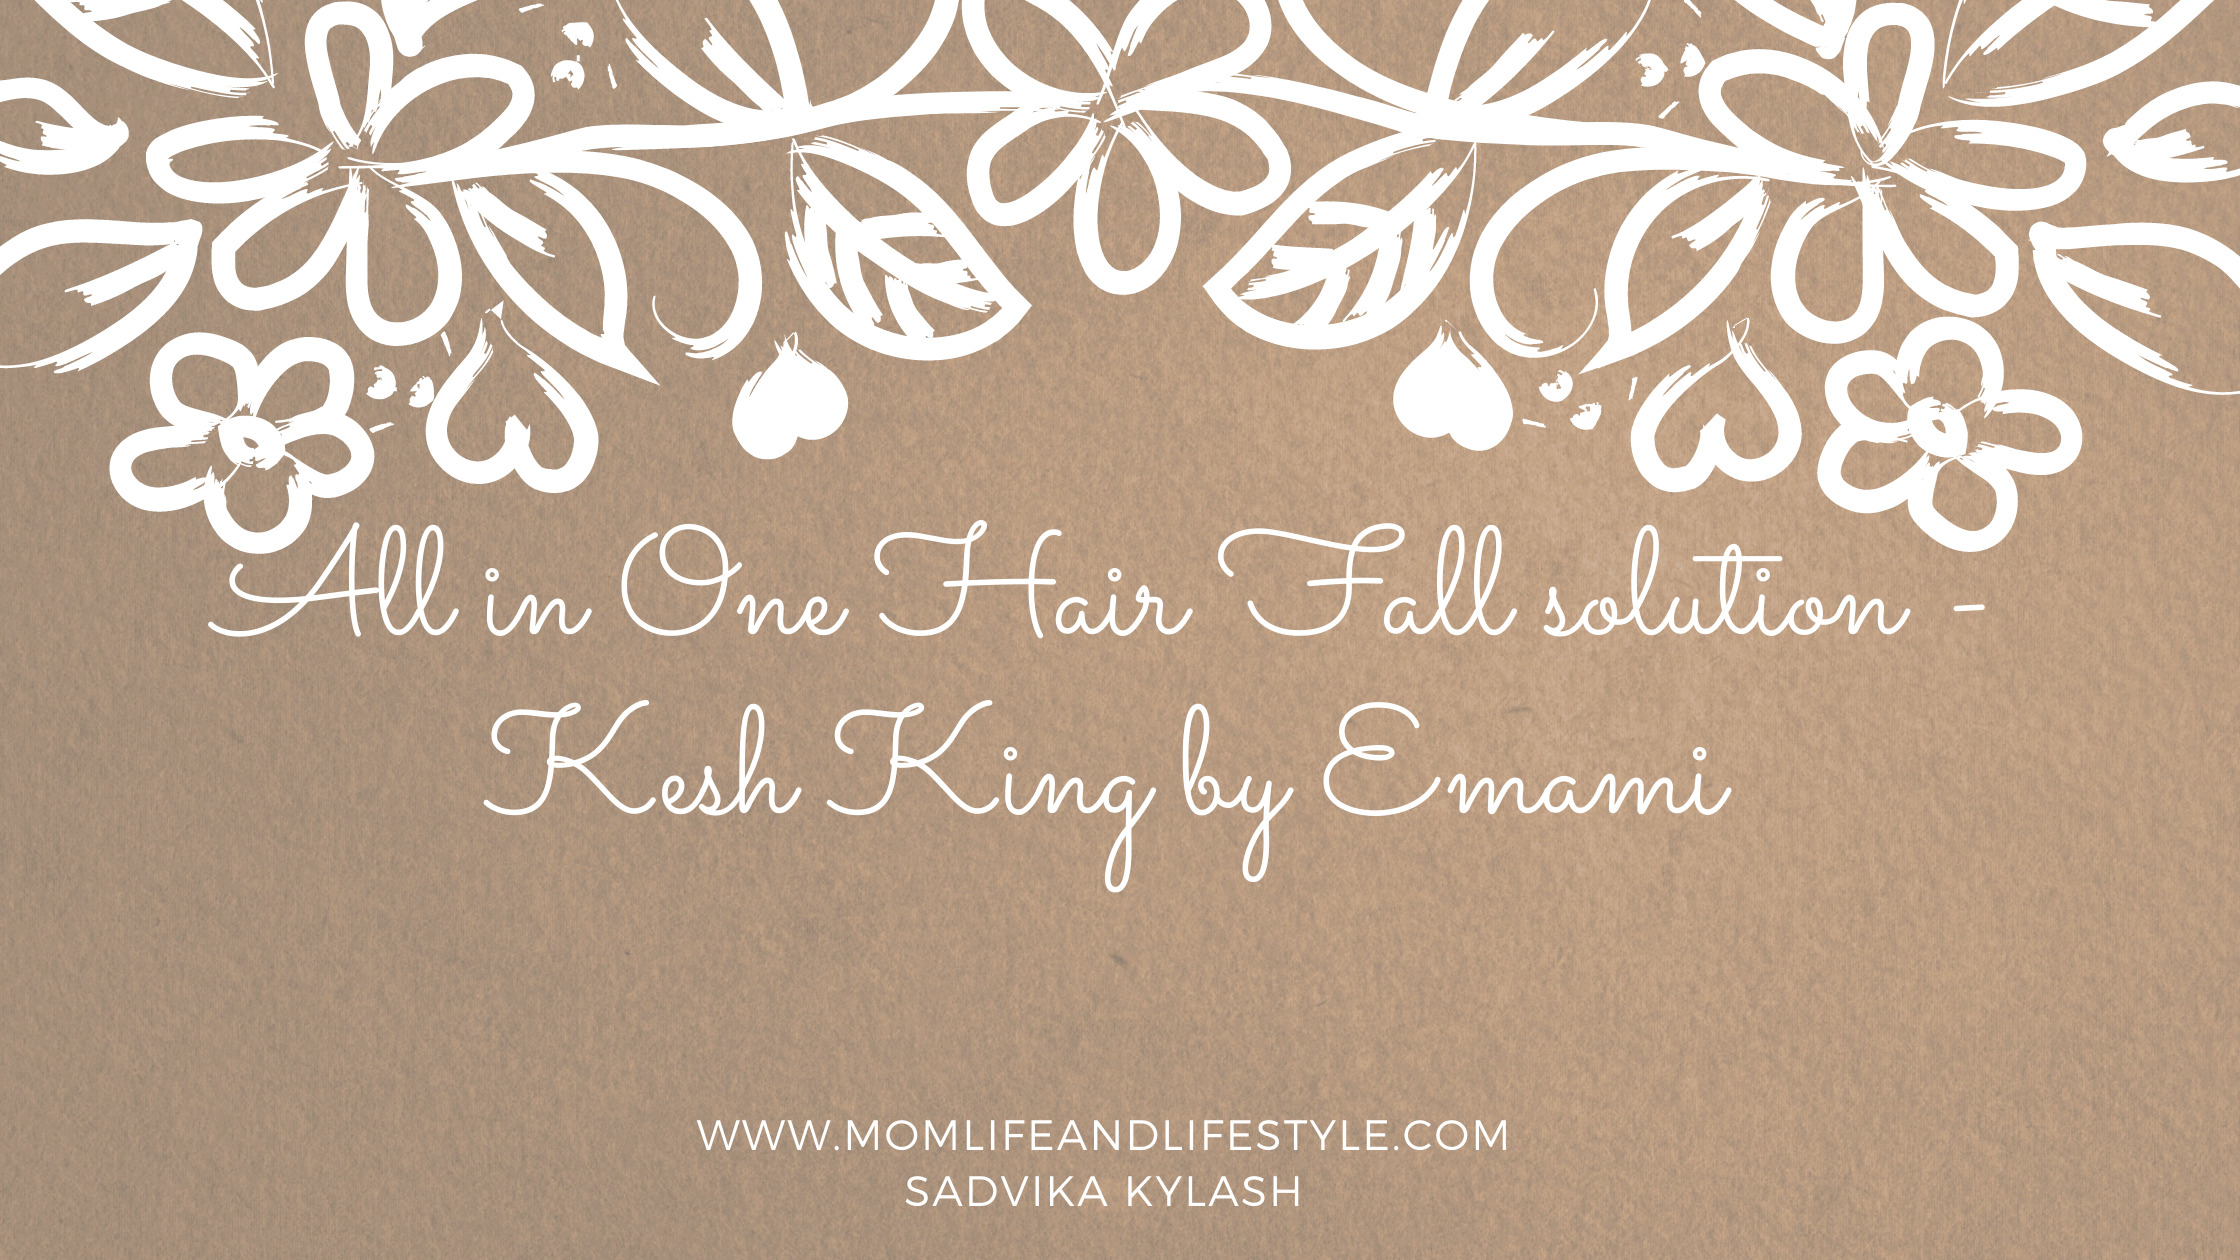 All in One Hair Fall solution - Kesh King by Emami